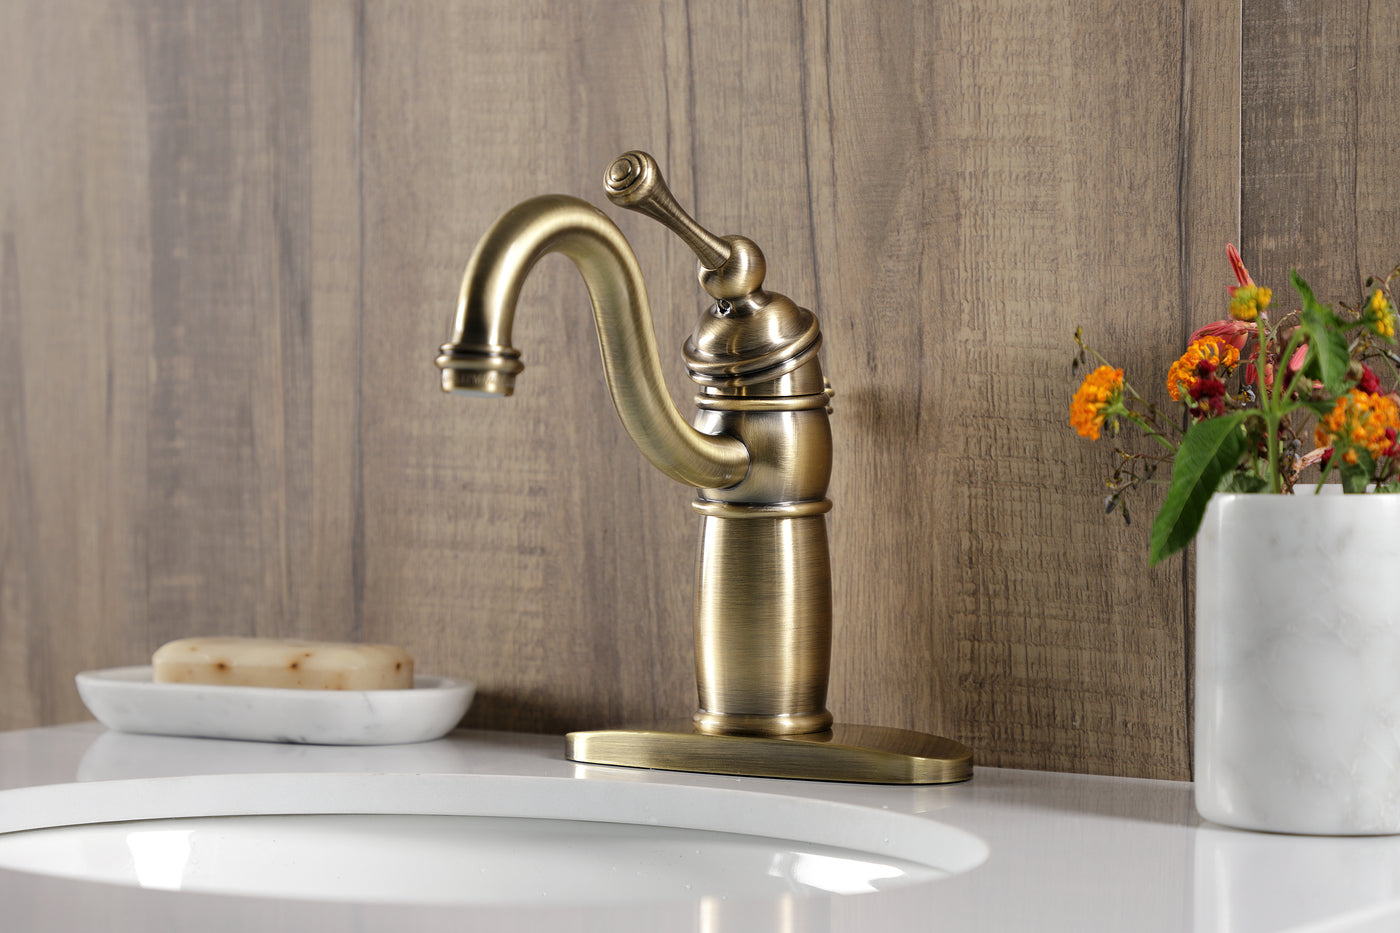 Elements of Design EB1403BL Single-Handle Bathroom Faucet with Pop-Up Drain, Antique Brass